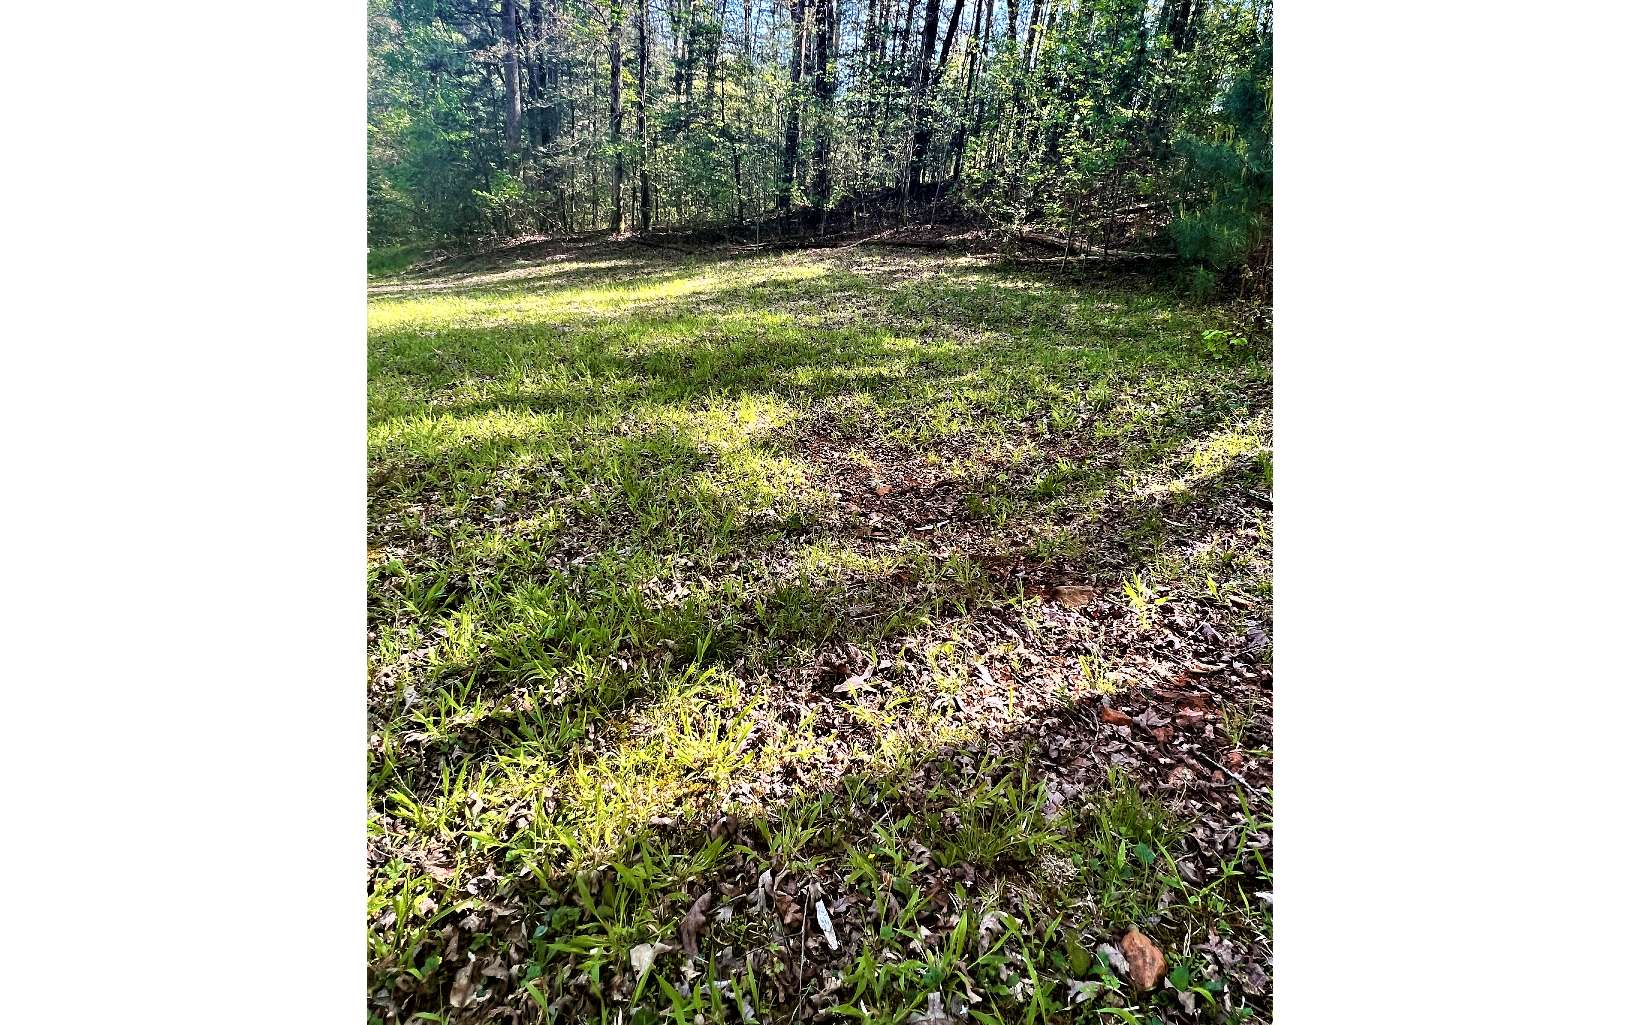 Mountaintown Pathways has very minimal building restrictions. It is a small, very quiet, subdivision just 7.7 Miles from the quaint little town of Downtown Ellijay and Fort Mountain State Park is less than 10 minutes past Mountaintown Rd. This 2.51 acre lot is one of many that were sold but very few of the lots have houses on them at this point as you will see in the photos. This lot has already has a clear PERC test. The current owner bought it with the intention of putting a log cabin kit on the property, but were unable to move up here from Florida. This is one of the only affordable, buildable, lots in Ellijay that isn't too steep and doesn't have a ton of HOA restrictions. The buildable portion of the lot sits back just enough from the road, and it already has the perfect area for a driveway as well. The price has been reduced to reflect the power easement that is up on the hill behind the house. My seller is ready to get this sold! Please make an offer!